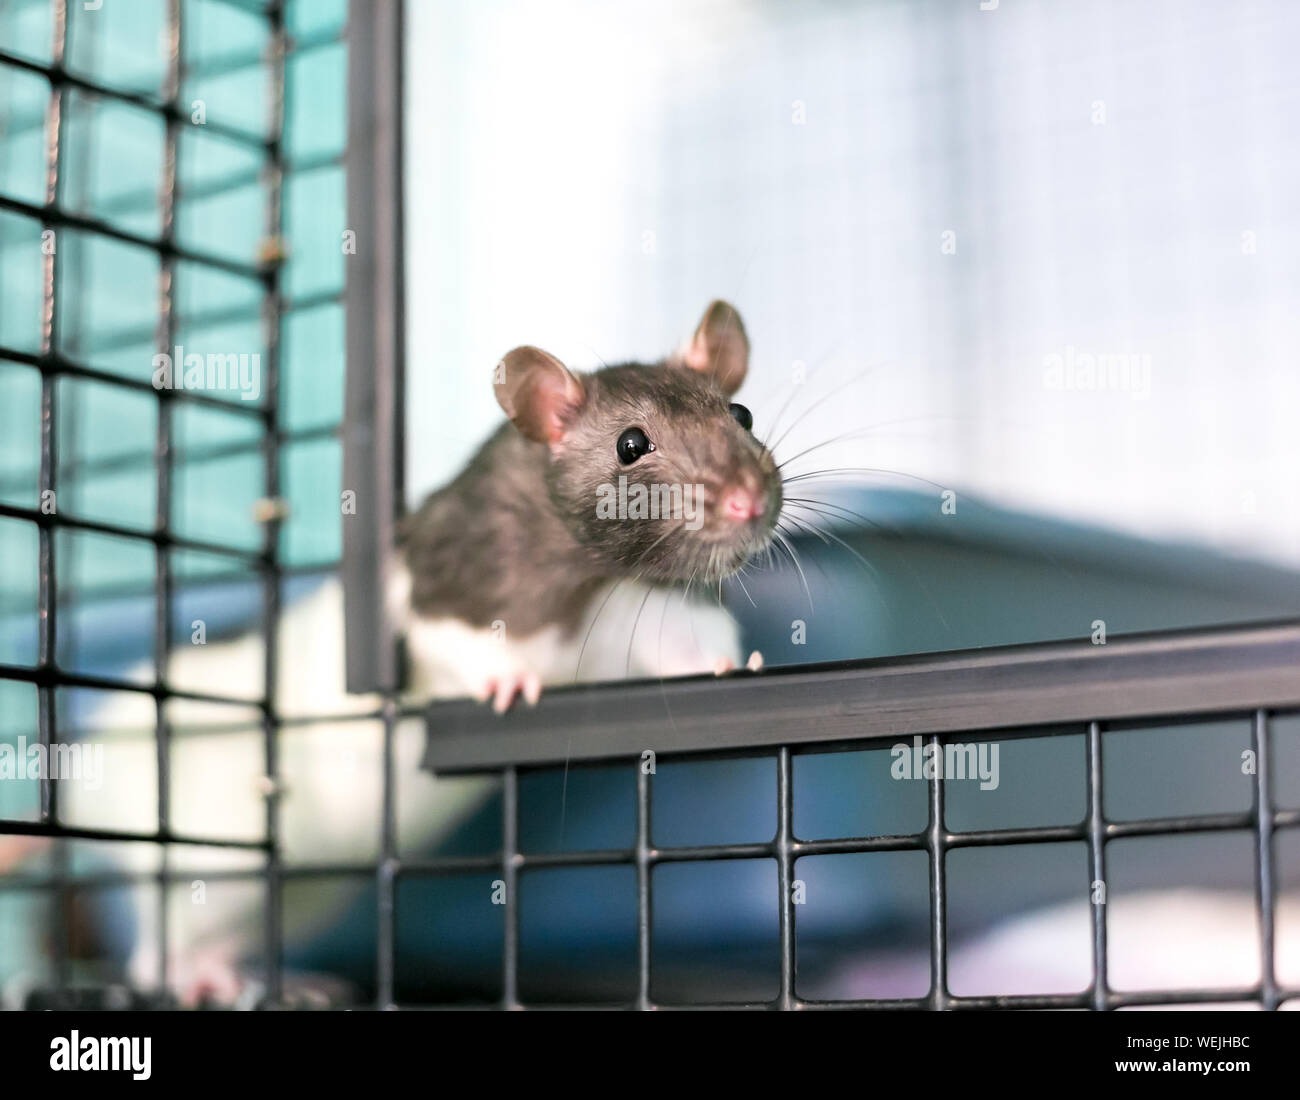 A curious domestic pet rat peeking out of its cage Stock Photo